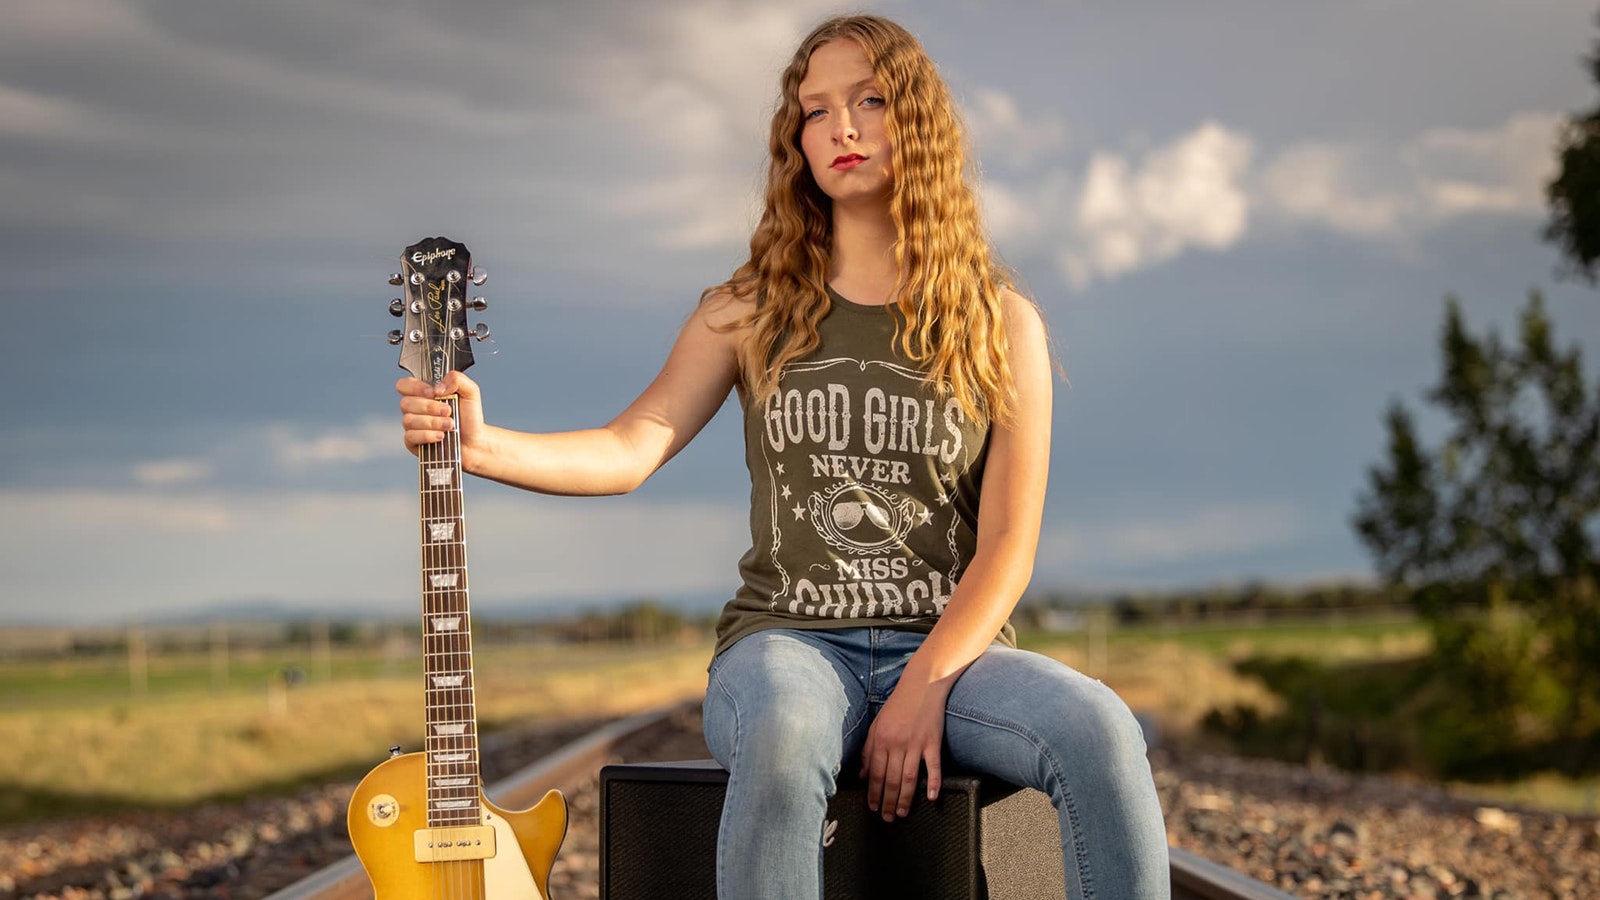 15-year-old Jillian Nordberg is taking Cody by storm.